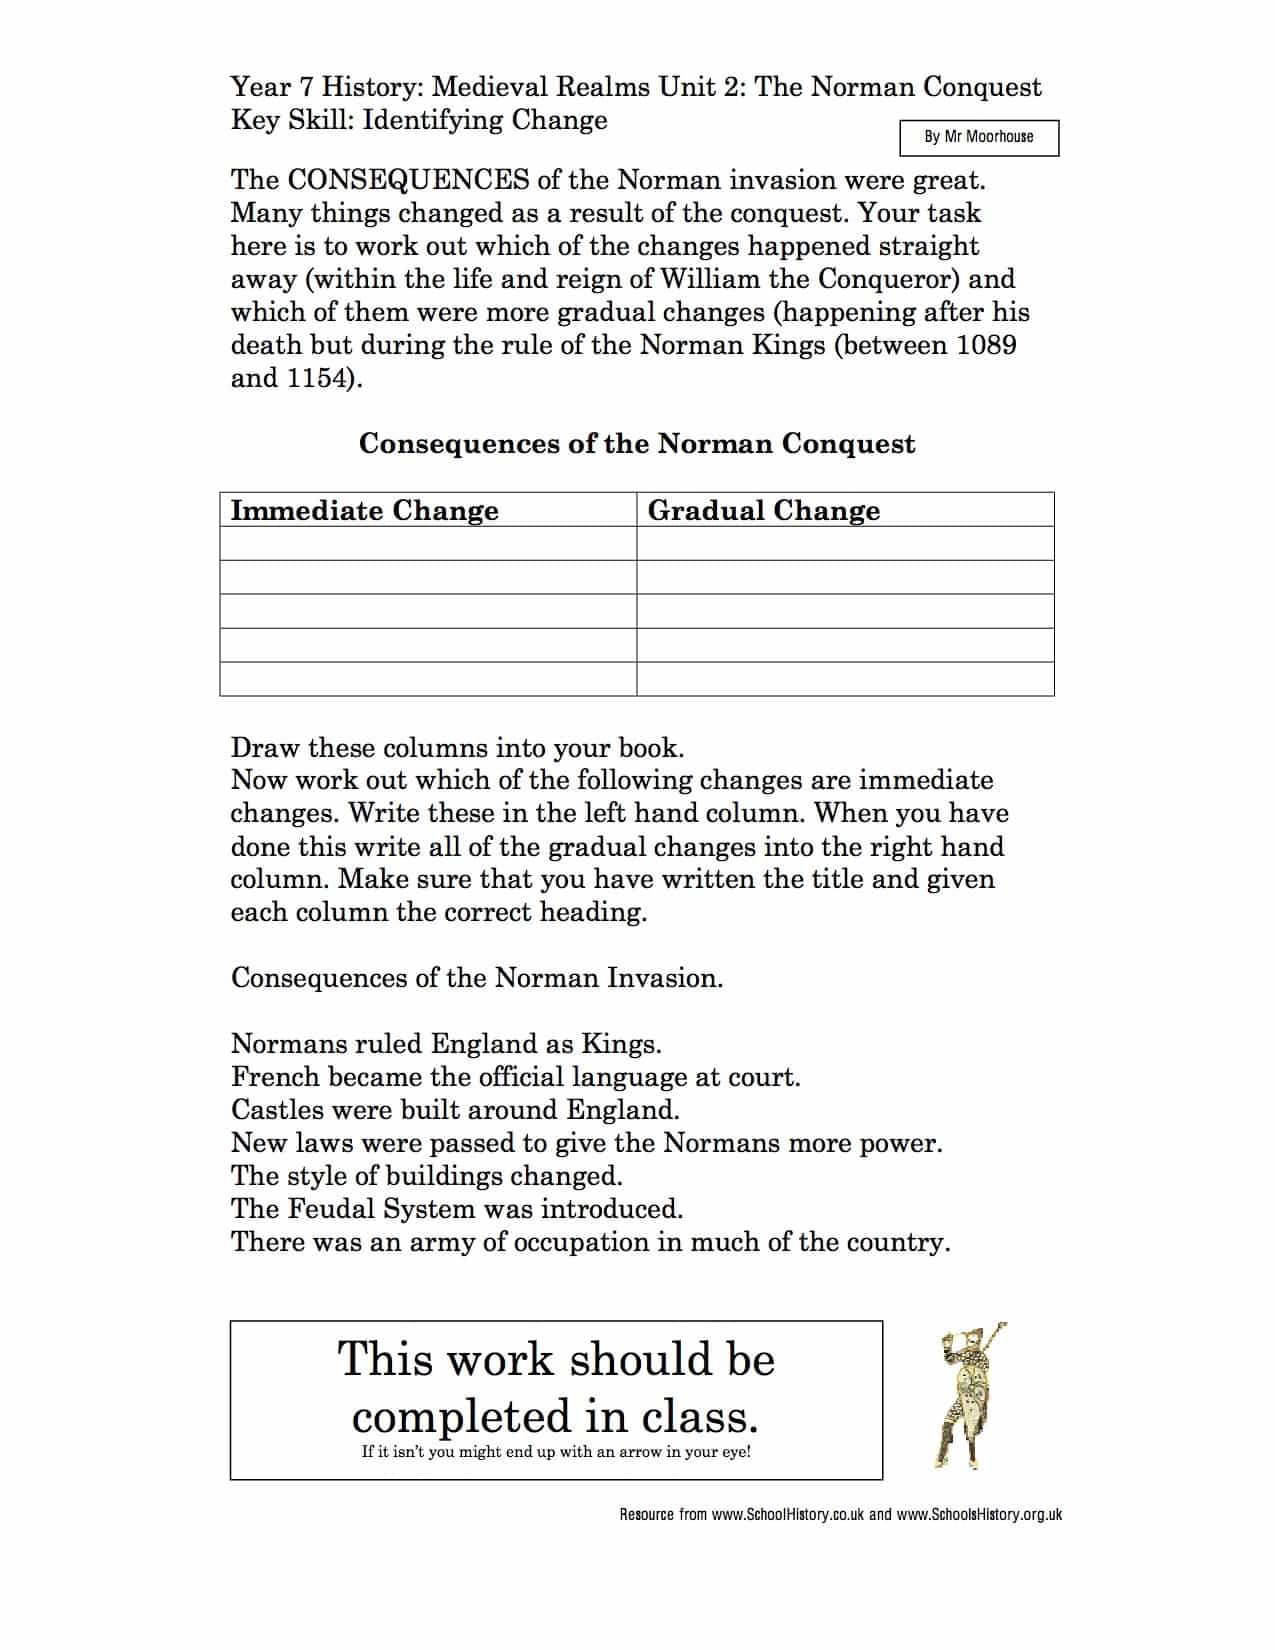 consequences of the norman invasion worksheet year 7